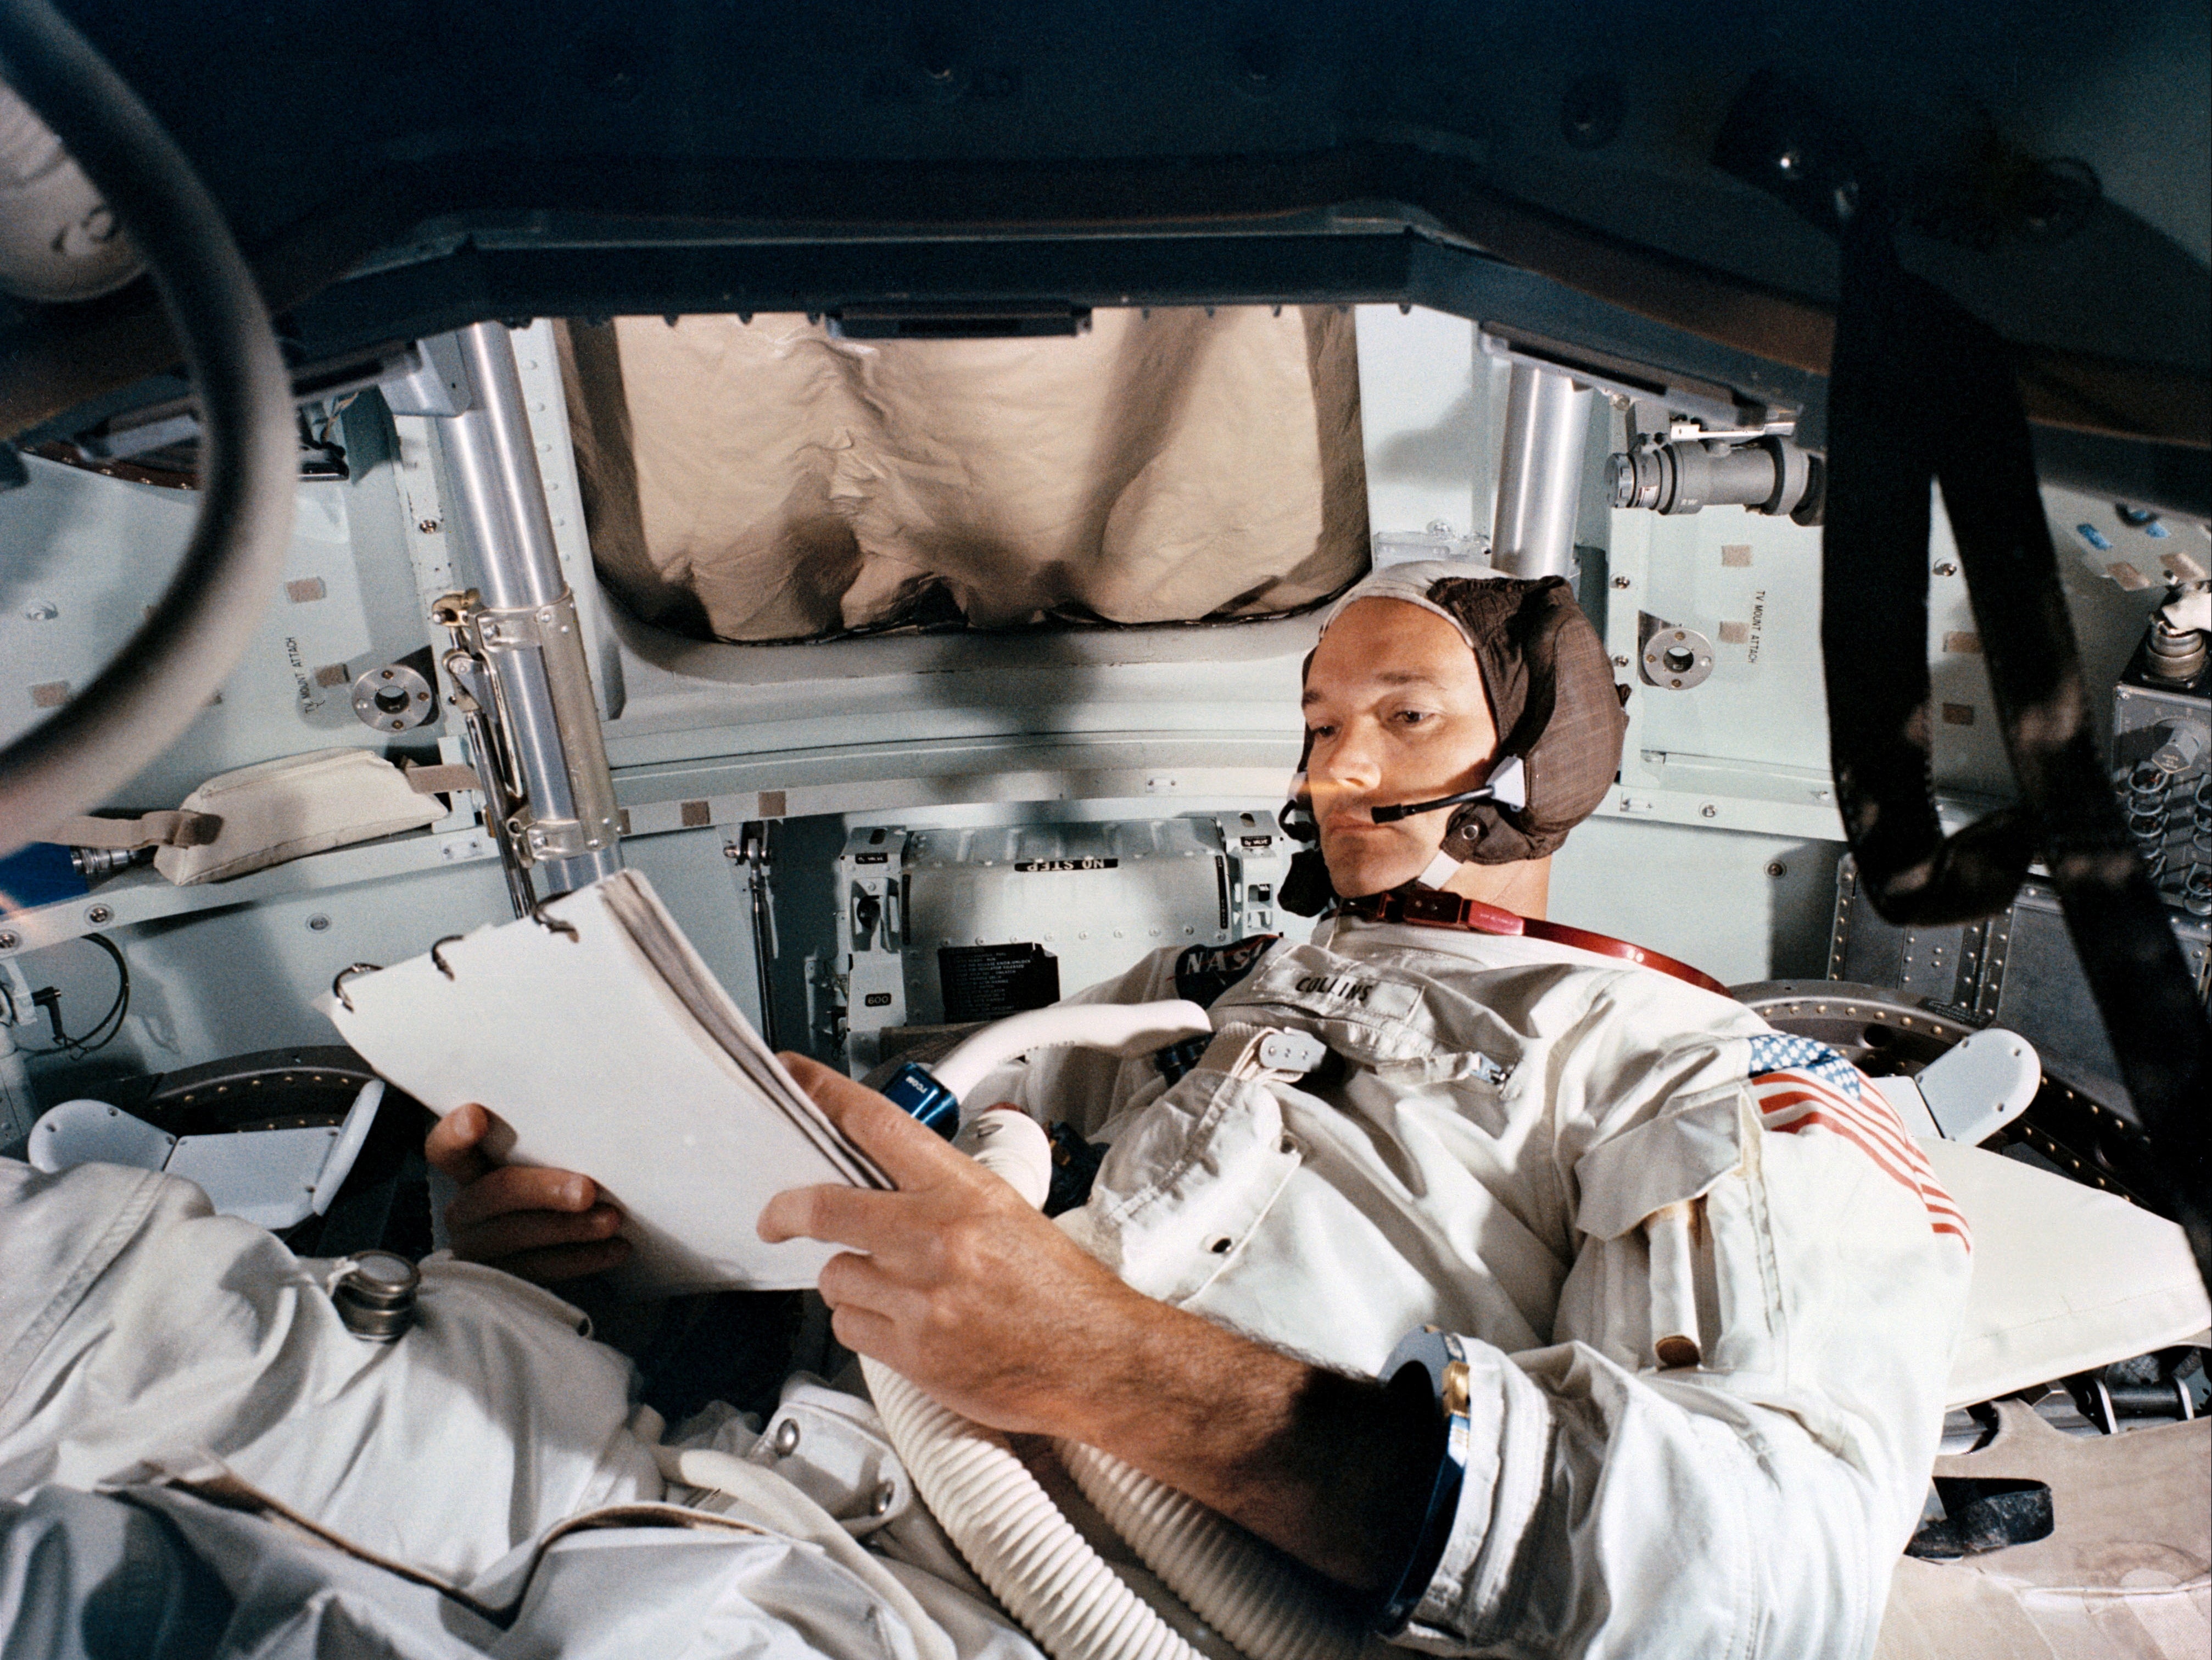 In a simulator at the Kennedy Space Centre in 1969